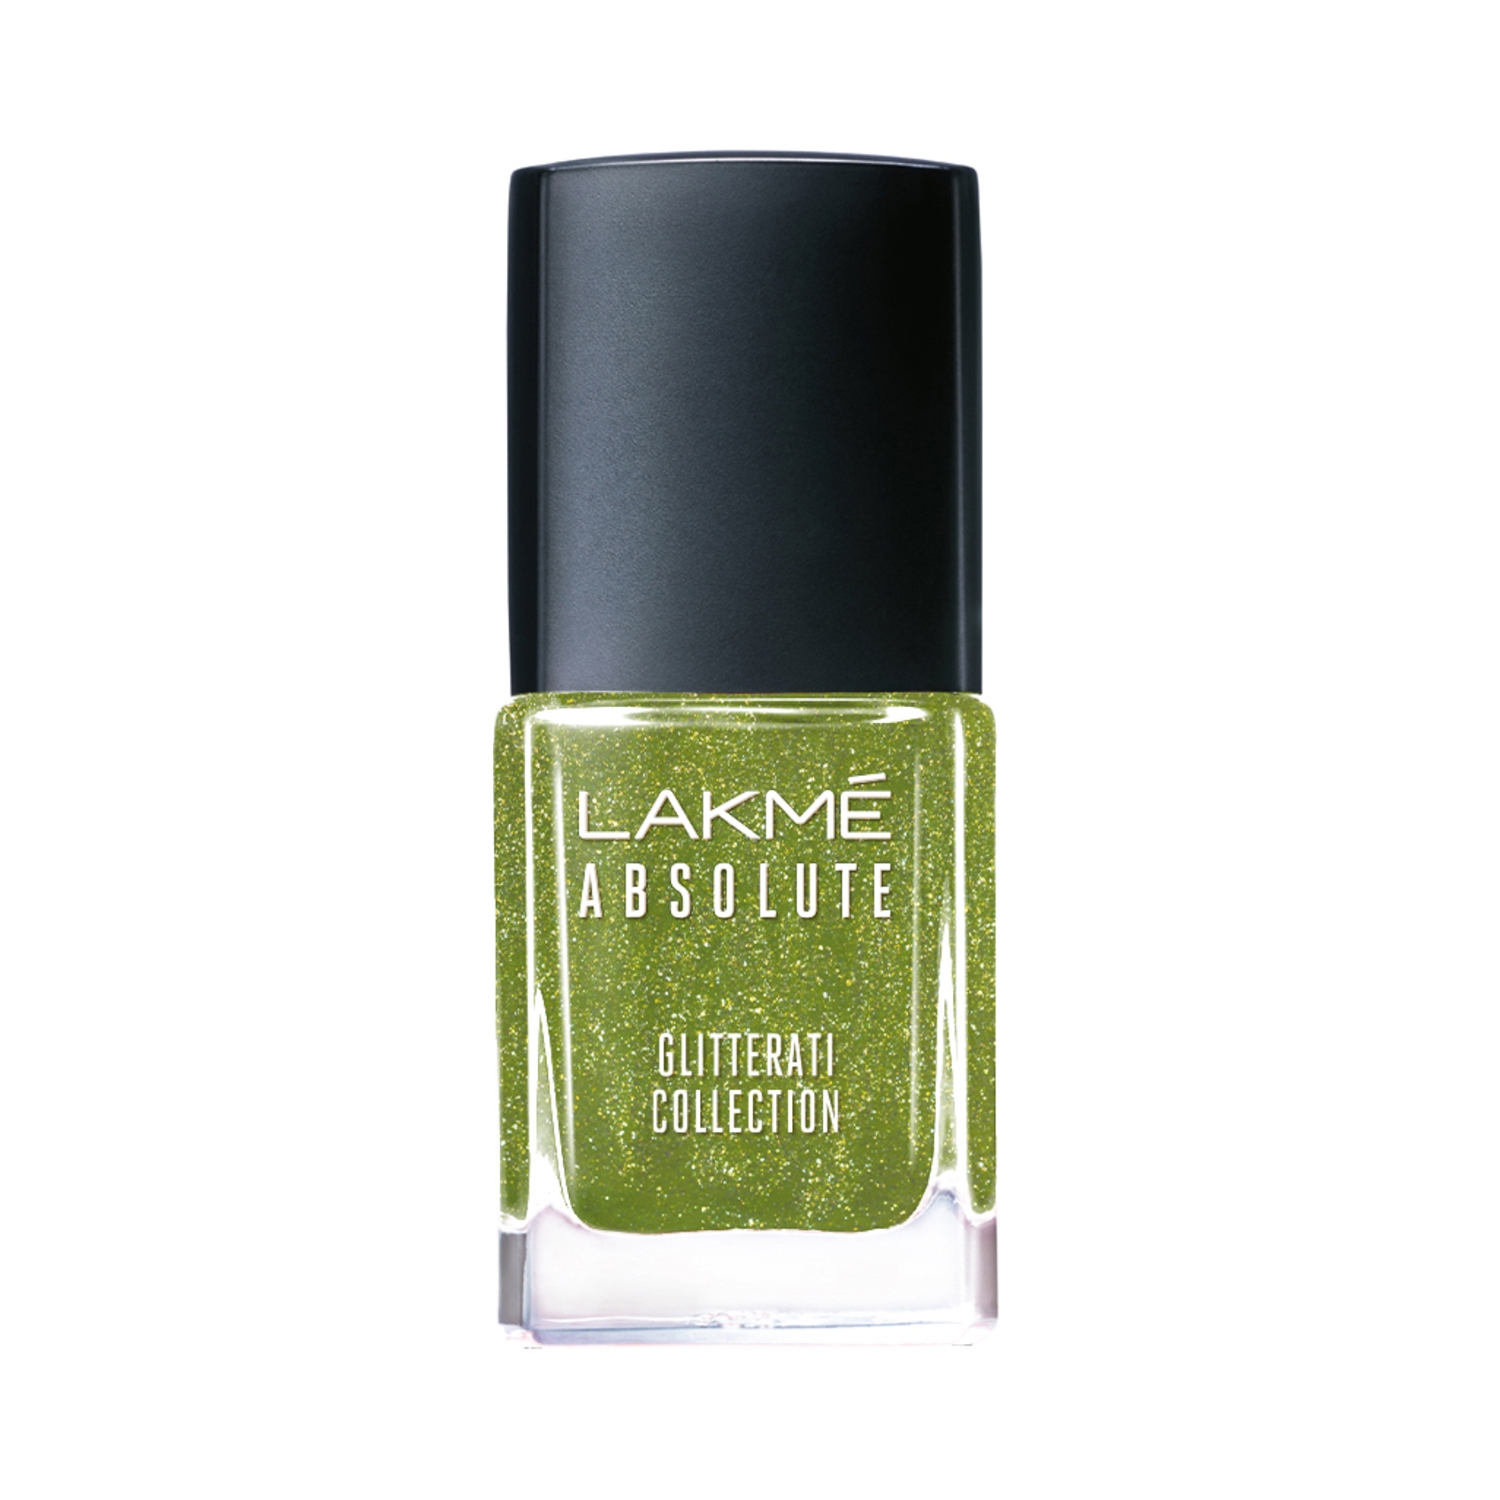 Buy M2 Cocoa Nude Nails for Women by LAKME Online | Ajio.com